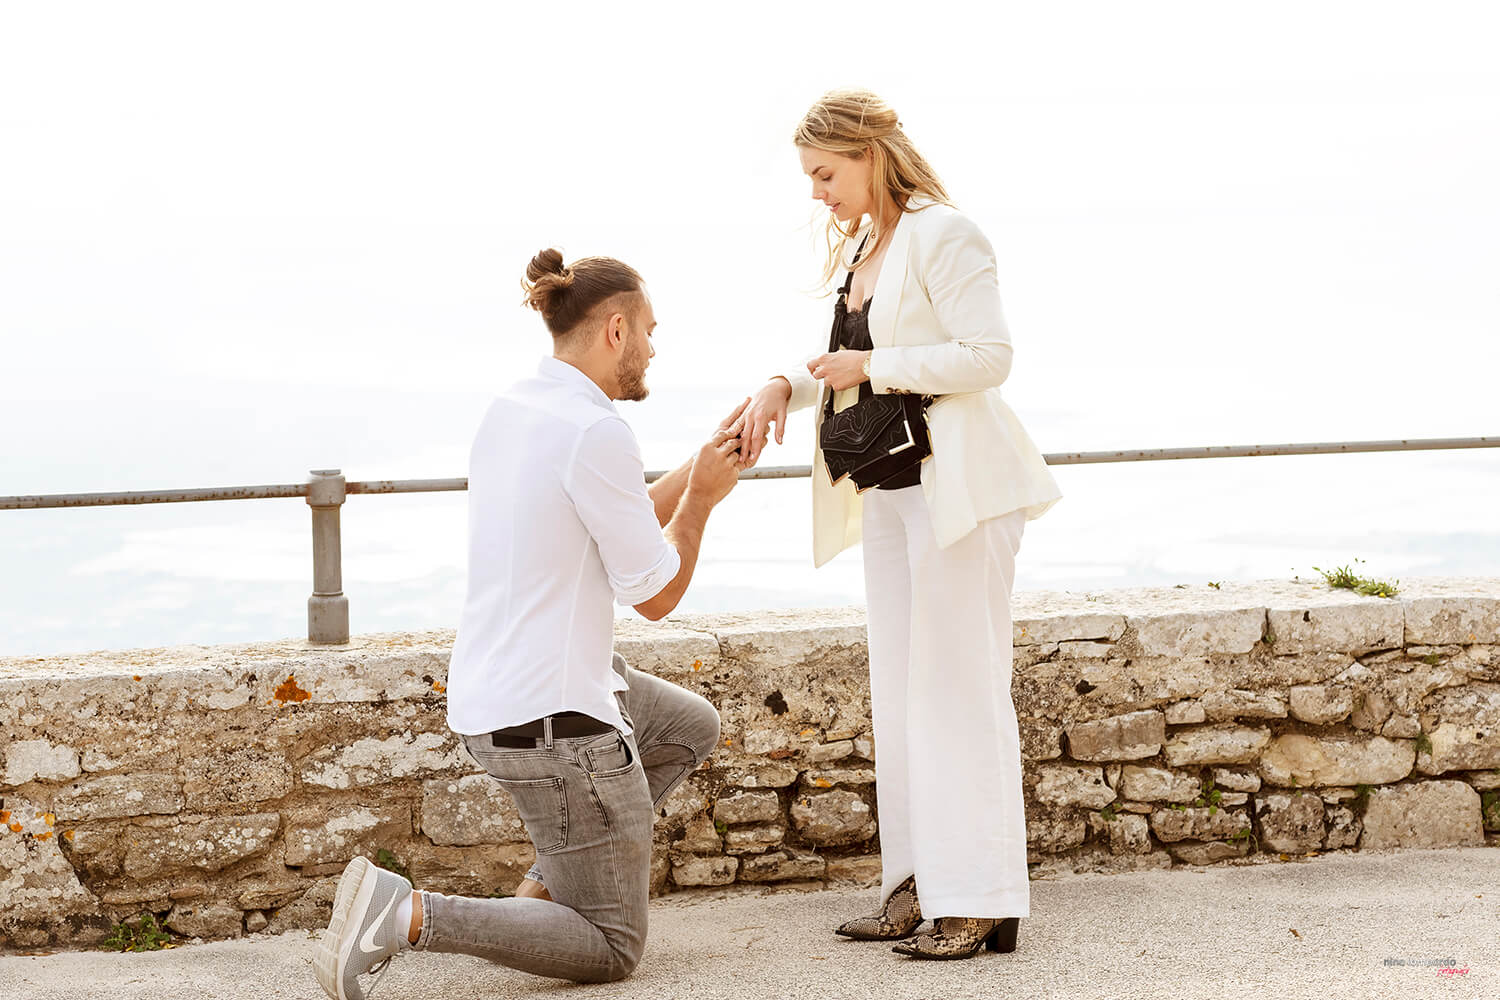 Erice photo session for surprise engagement proposal photo by Nino Lombardo